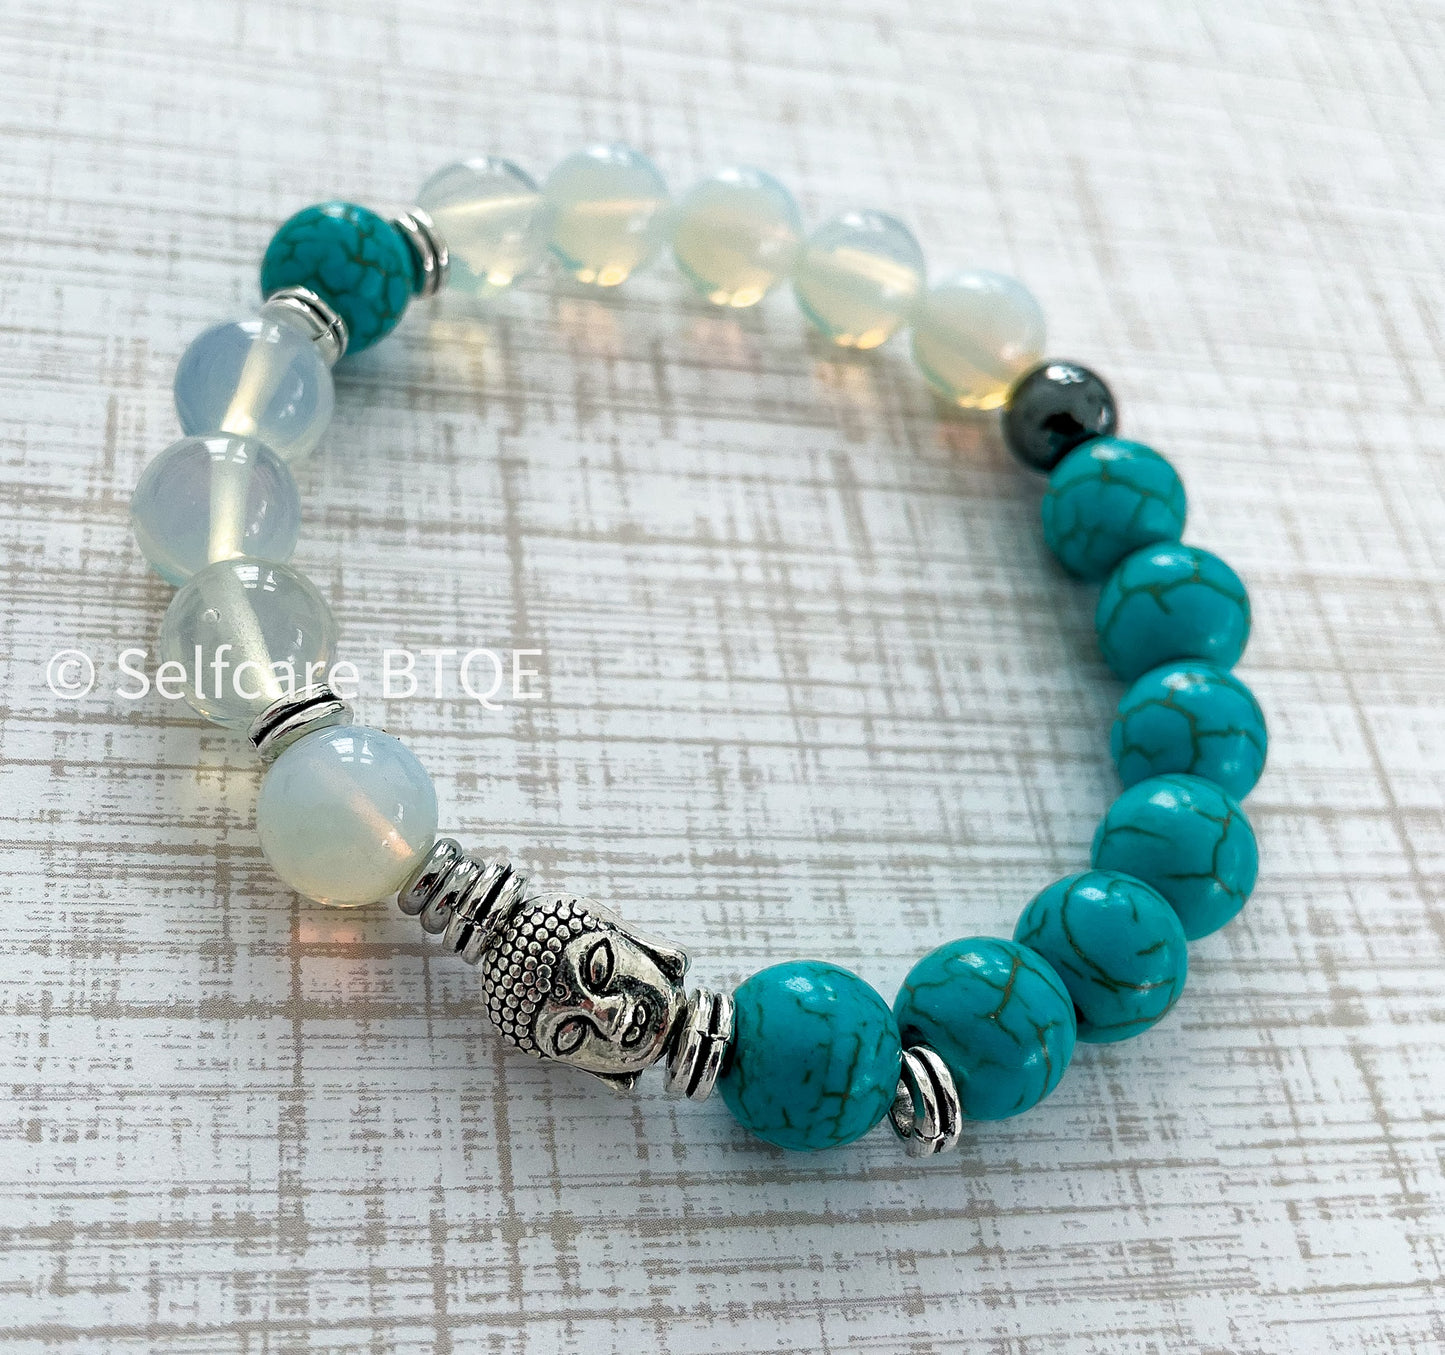 The Enlightened Harmony Bracelet with Opalite Moonstone and Turquoise Natural Stones | 10mm